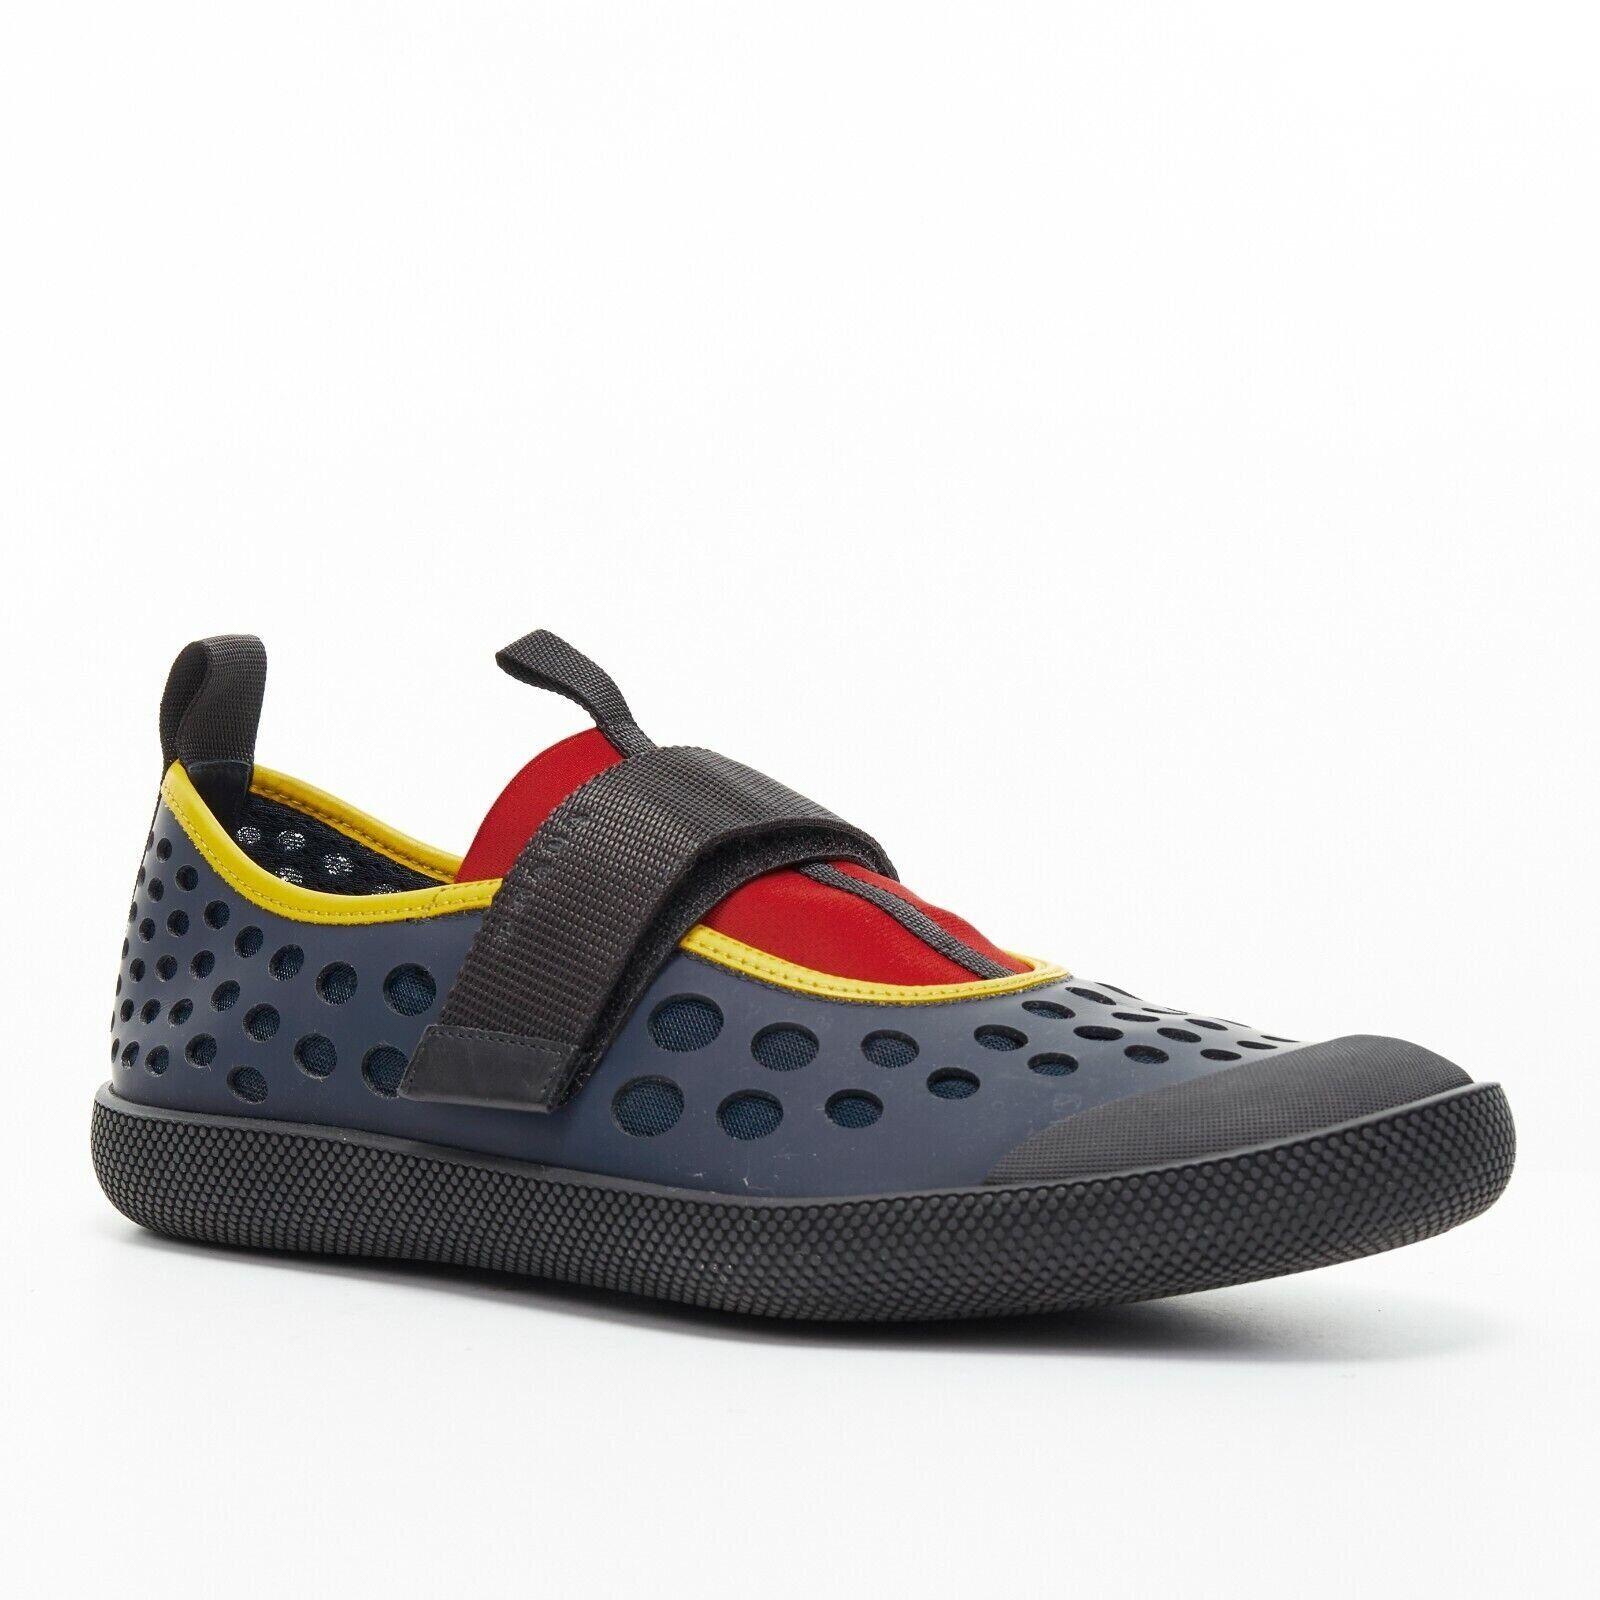 new PRADA navy holey cut out rubber magic tape strap low casual sneaker UK7.5
Reference: TGAS/A03038
Brand: Prada
Designer: Miuccia Prada
Model: Hole cutout sneaker
Material: Rubber
Color: Blue, Red
Pattern: Solid
Lining: Leather
Extra Details: Blue